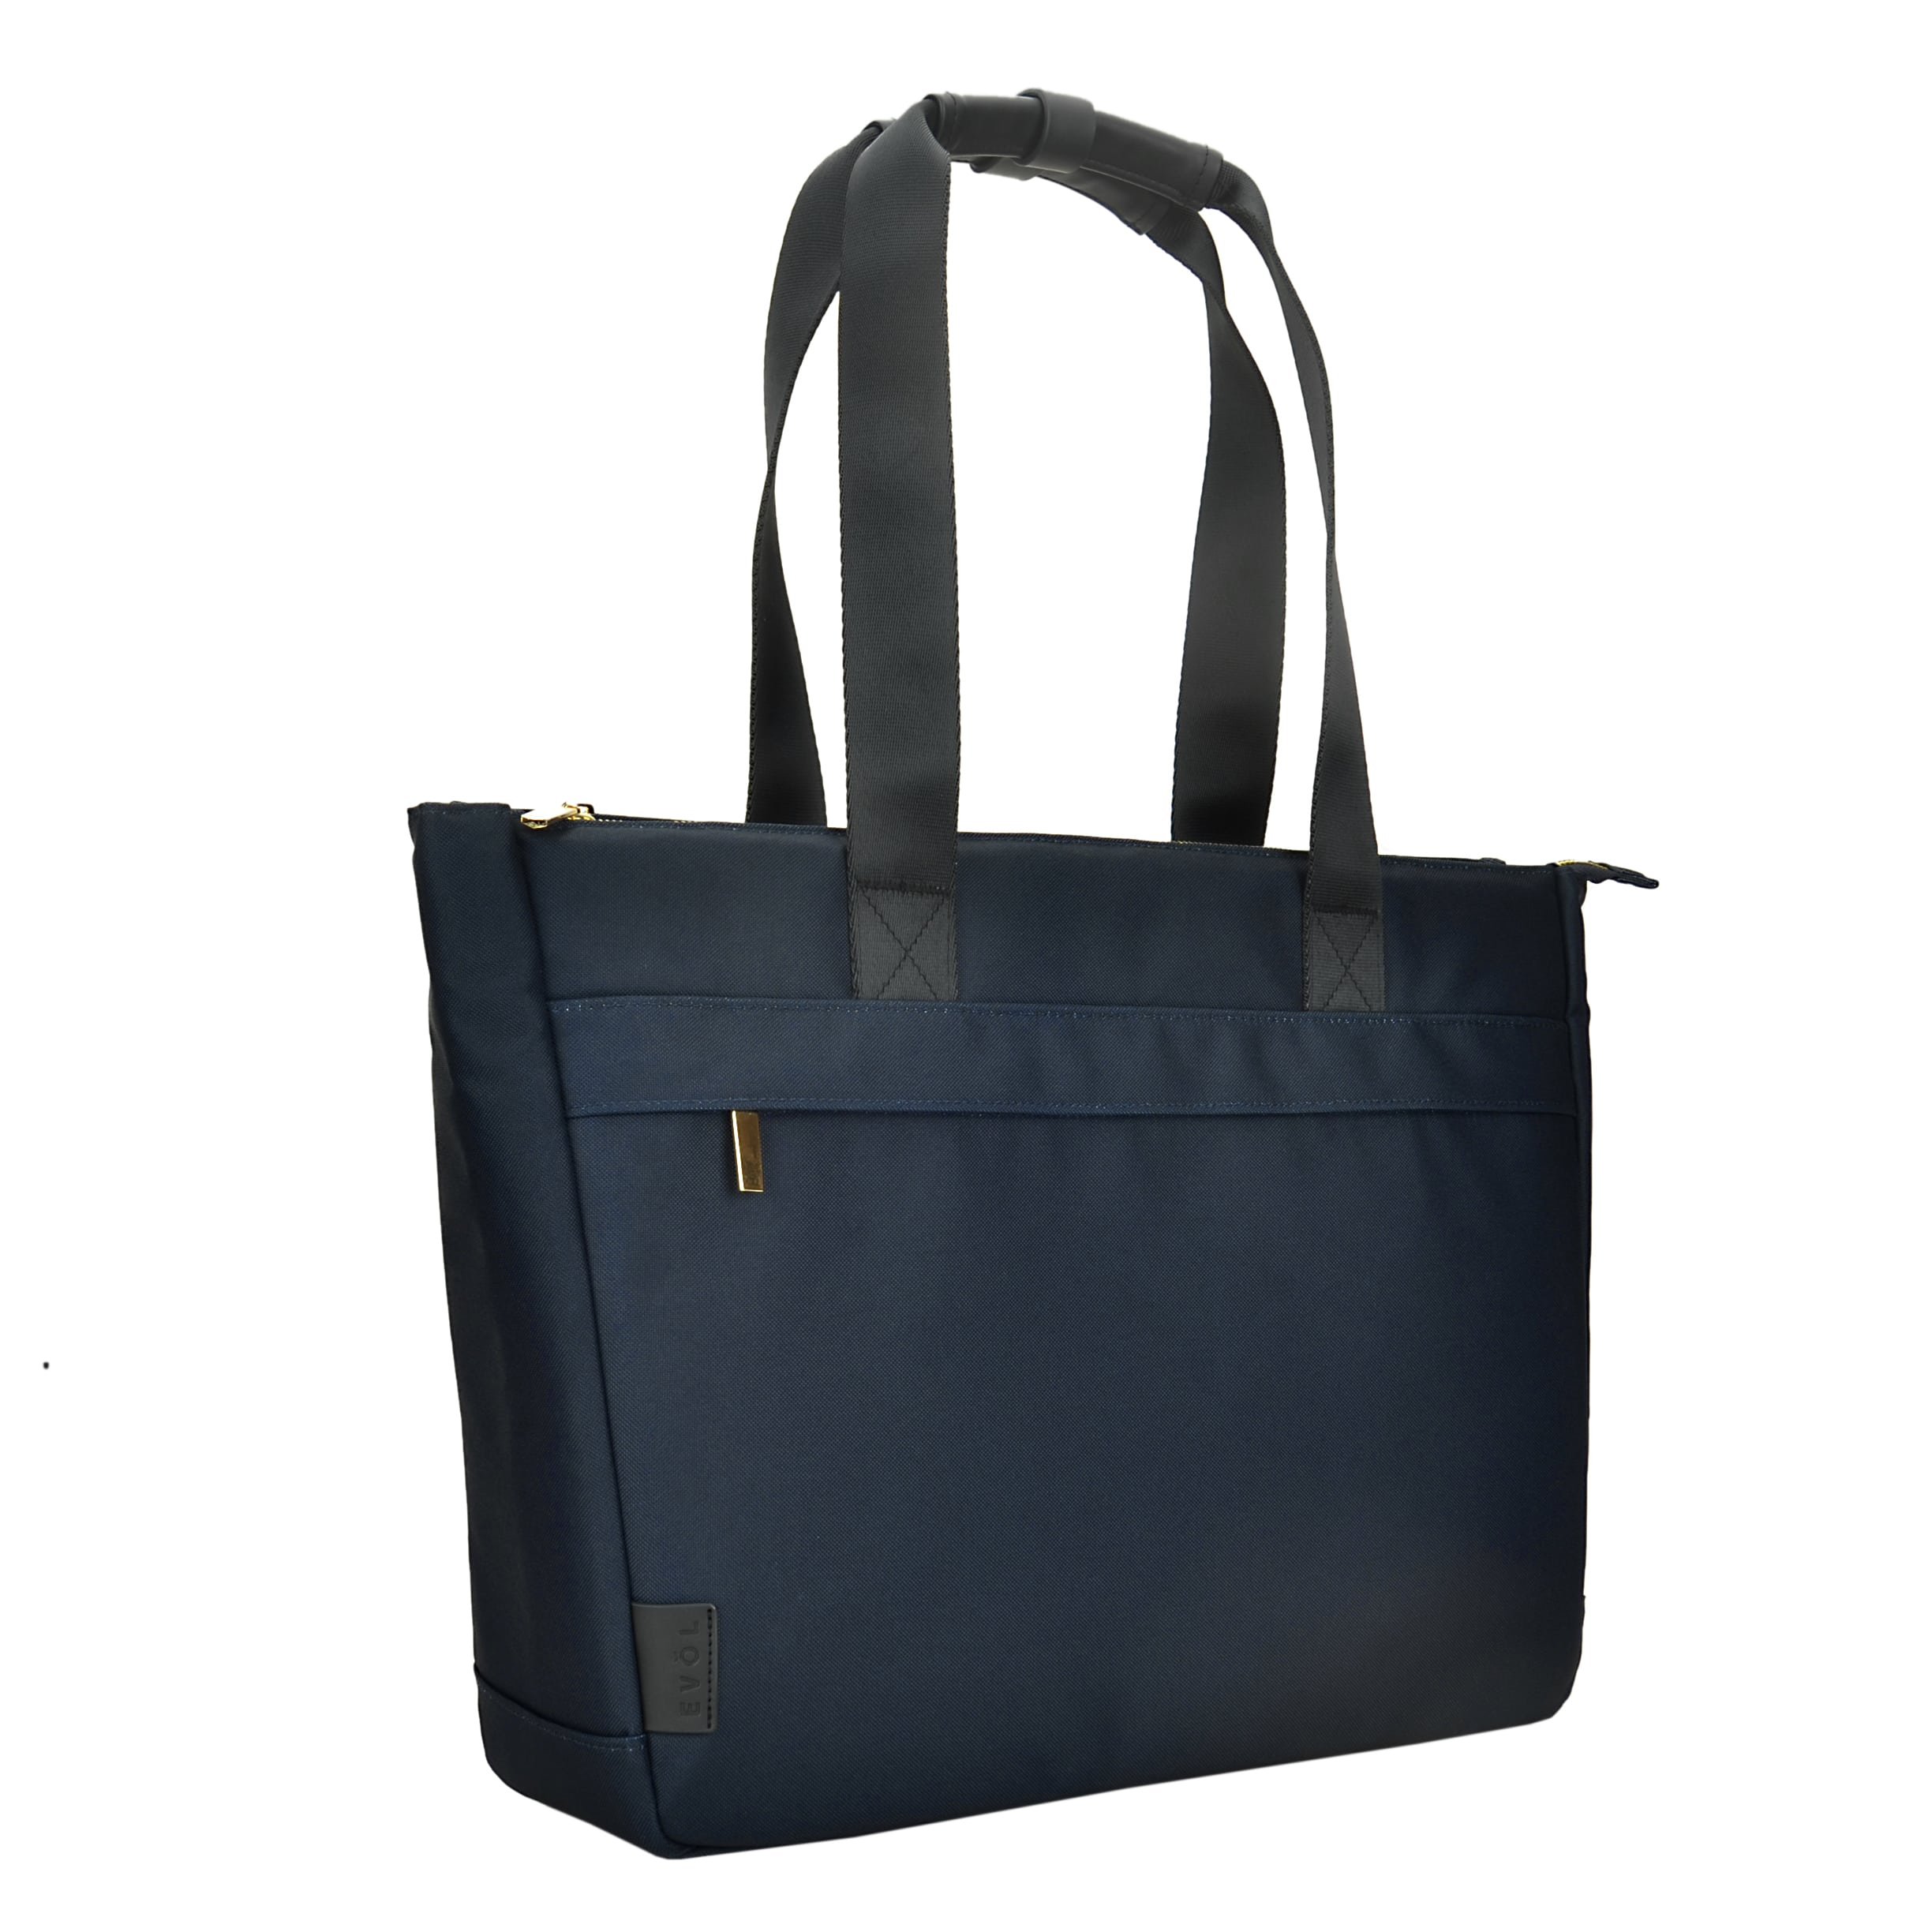 Generation Earth 14.1" Recycled Berlin Tote Bag - Navy